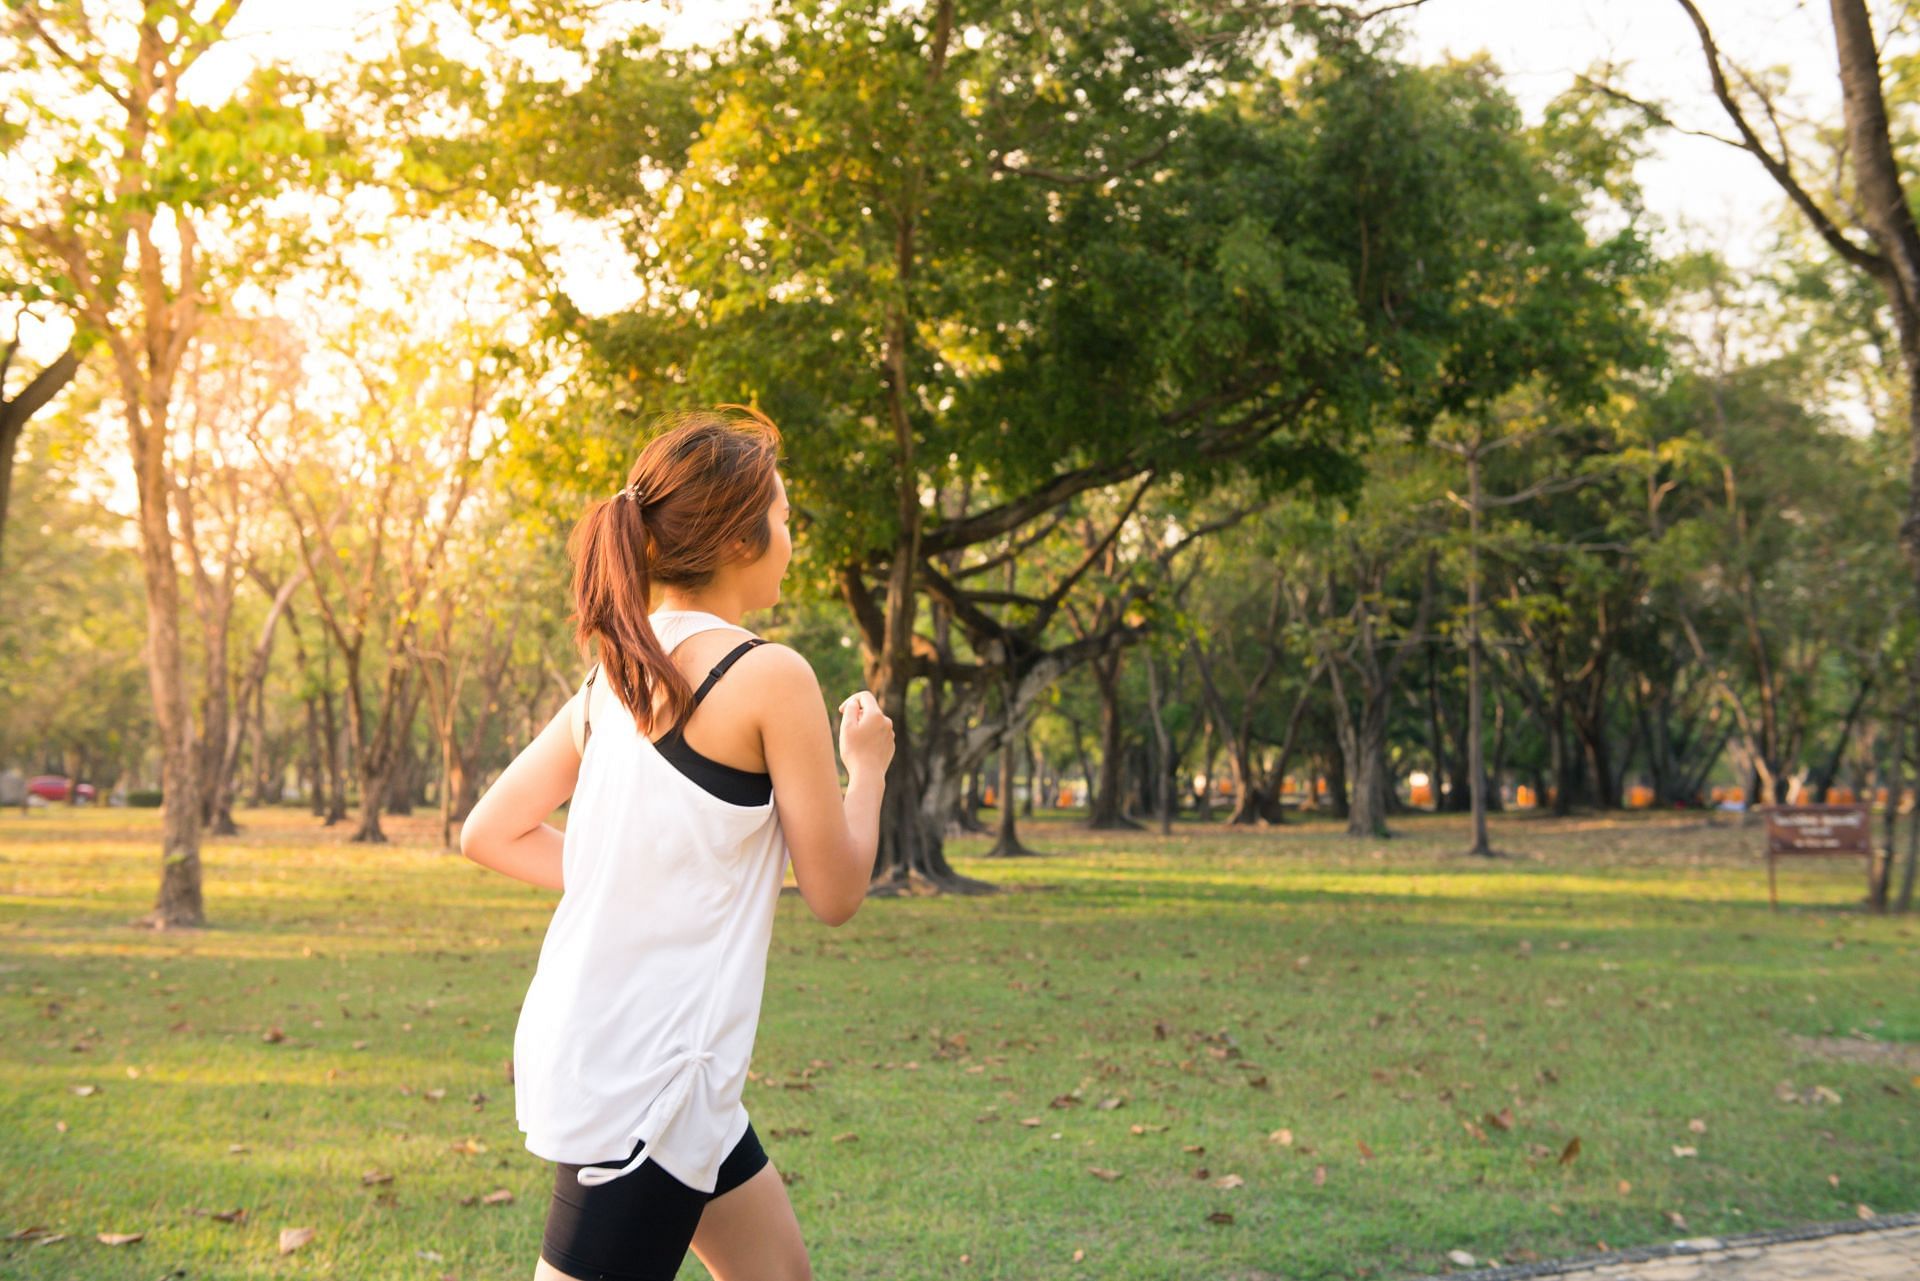 Running is excellent for weight loss. (Image via Pexels/Tirachard Kumtanom)